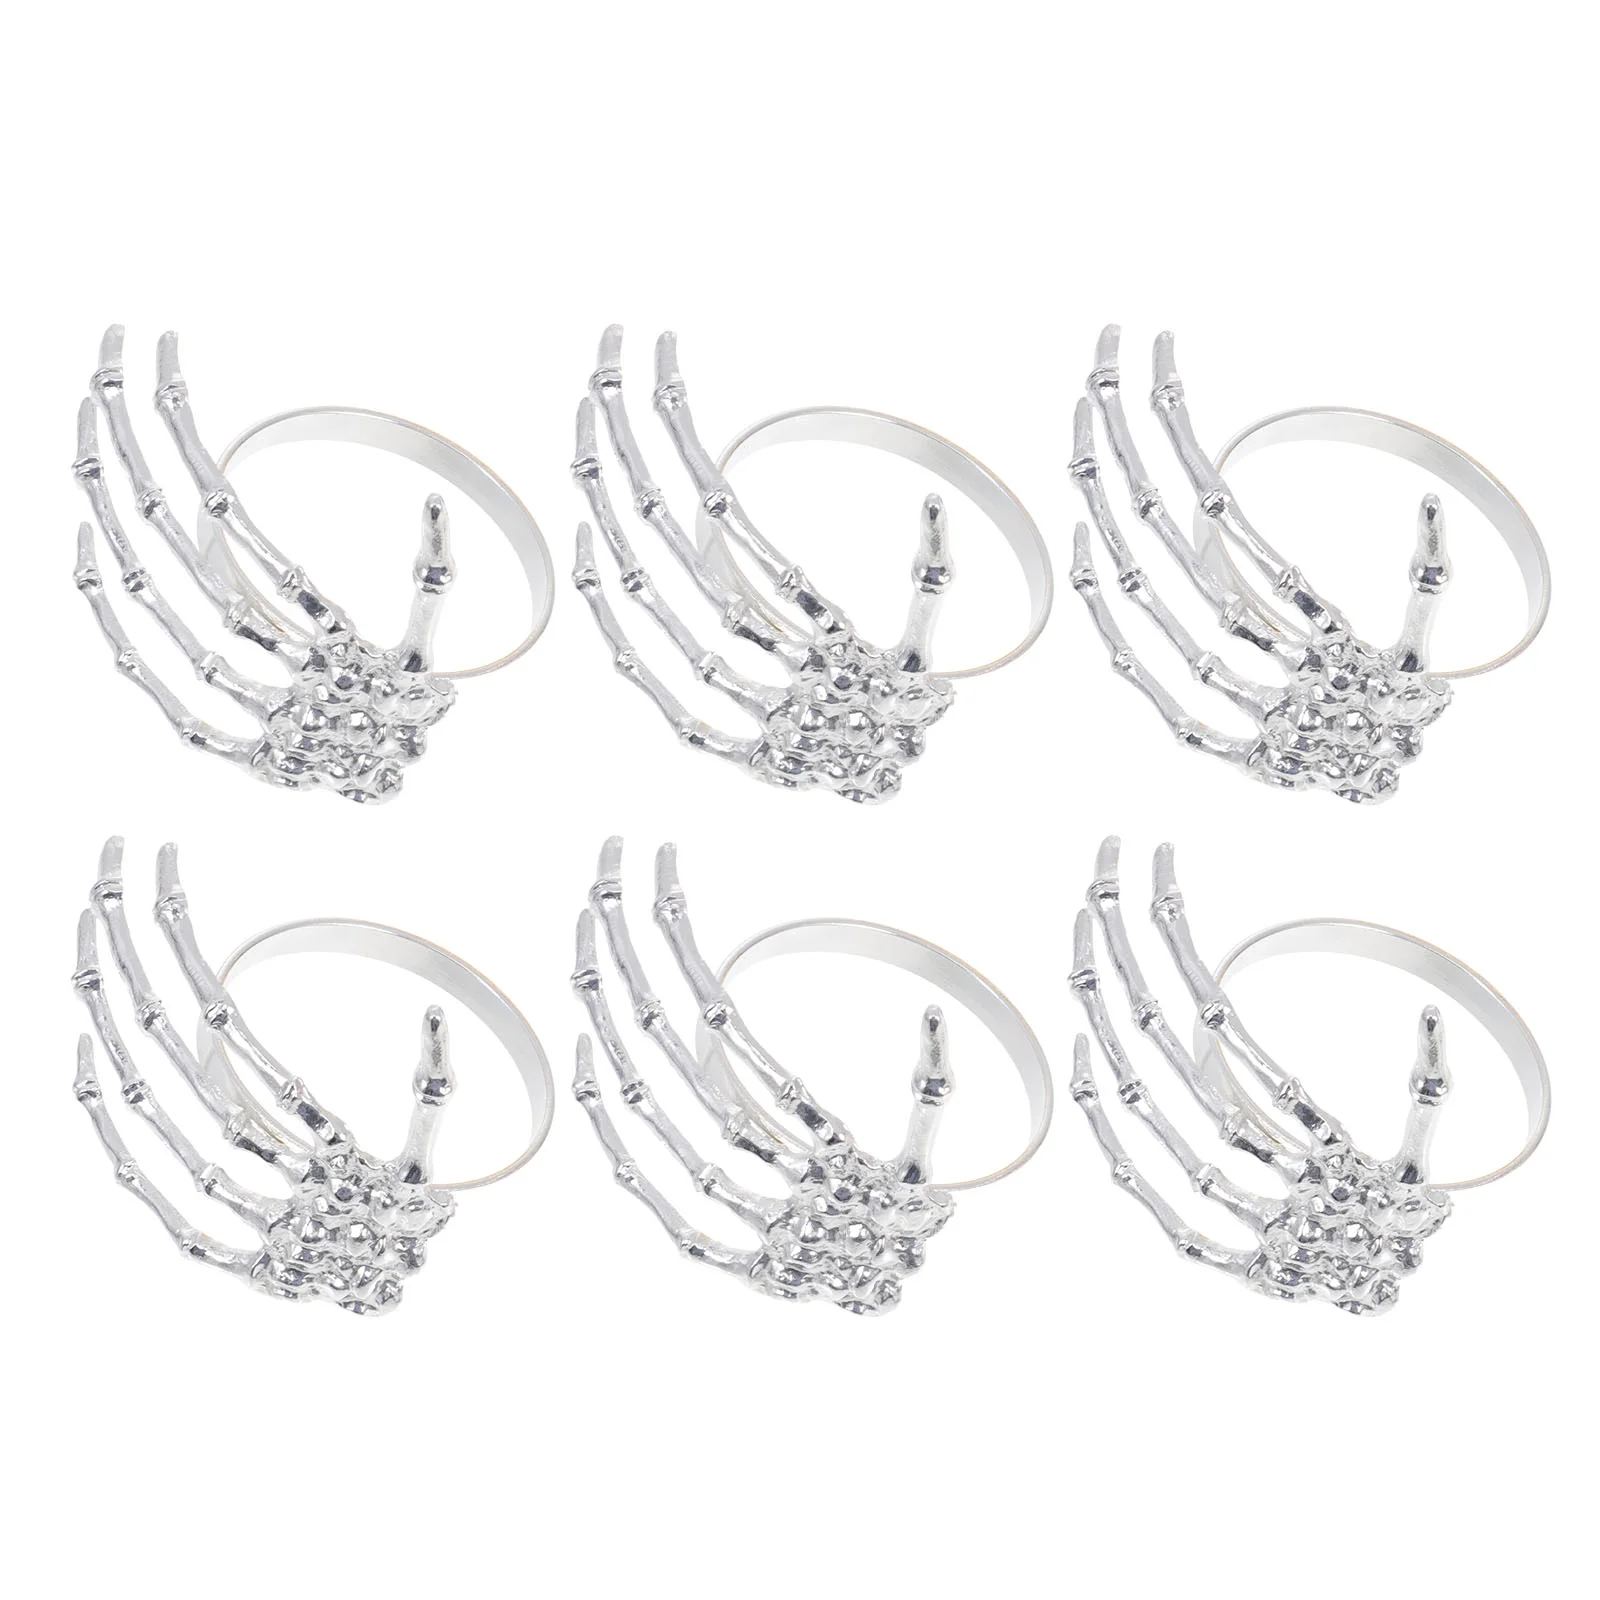 

6 Pcs Ghost Hand Napkin Buckle Decor Decors Household Rings Palm Shaped Alloy Buckles Table Supplies Ferroalloy Banquet Holders